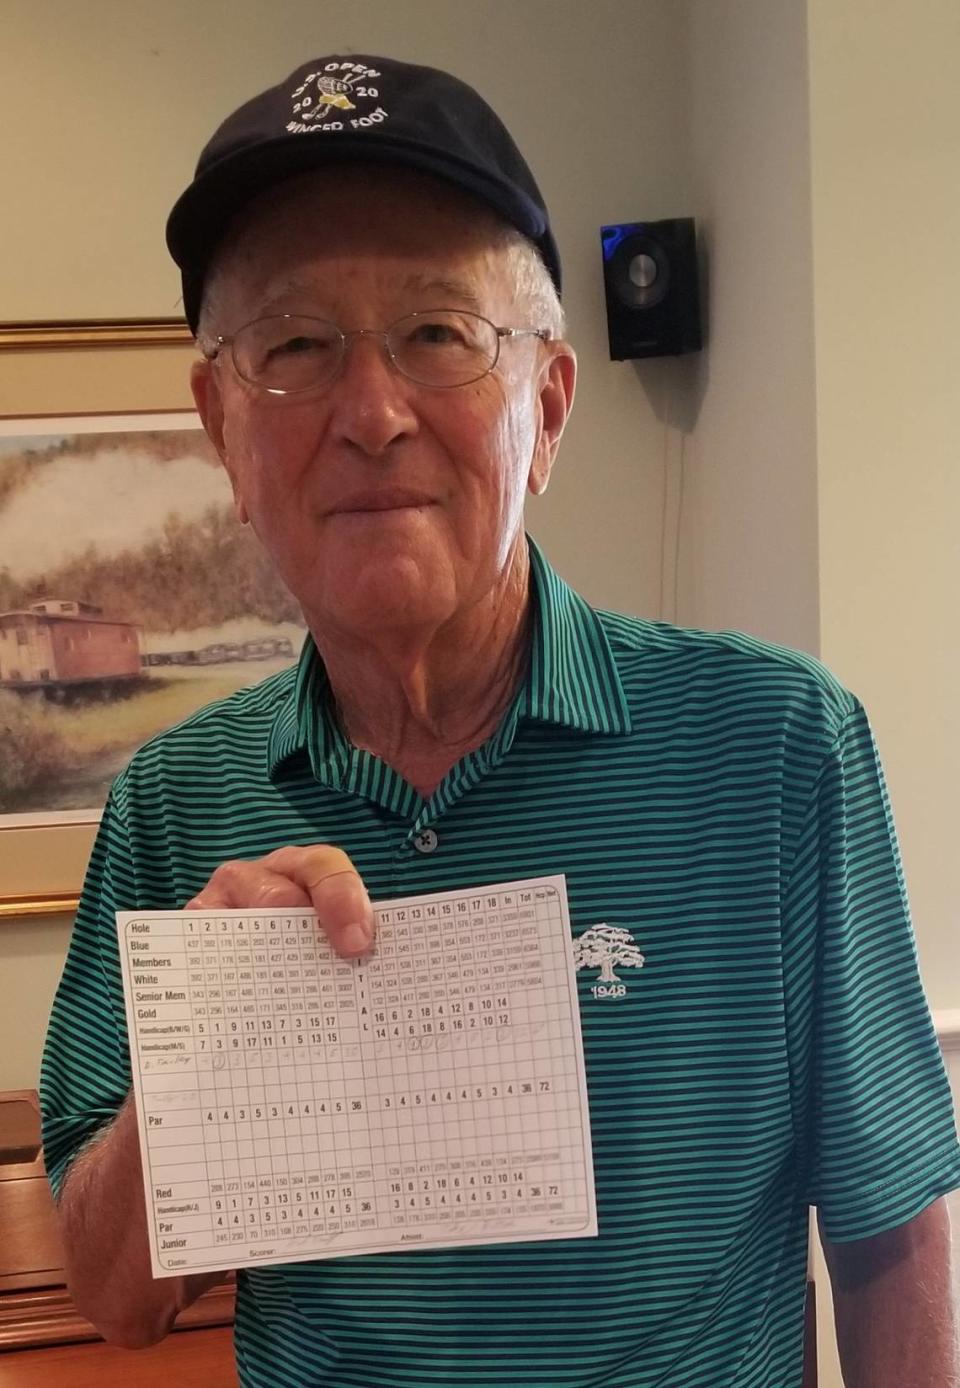 David Fairley, an 83-year-old amateur golfer from Charlotte, holds a scorecard from a day in which he shot a 67 over 18 holes earlier in 2020.